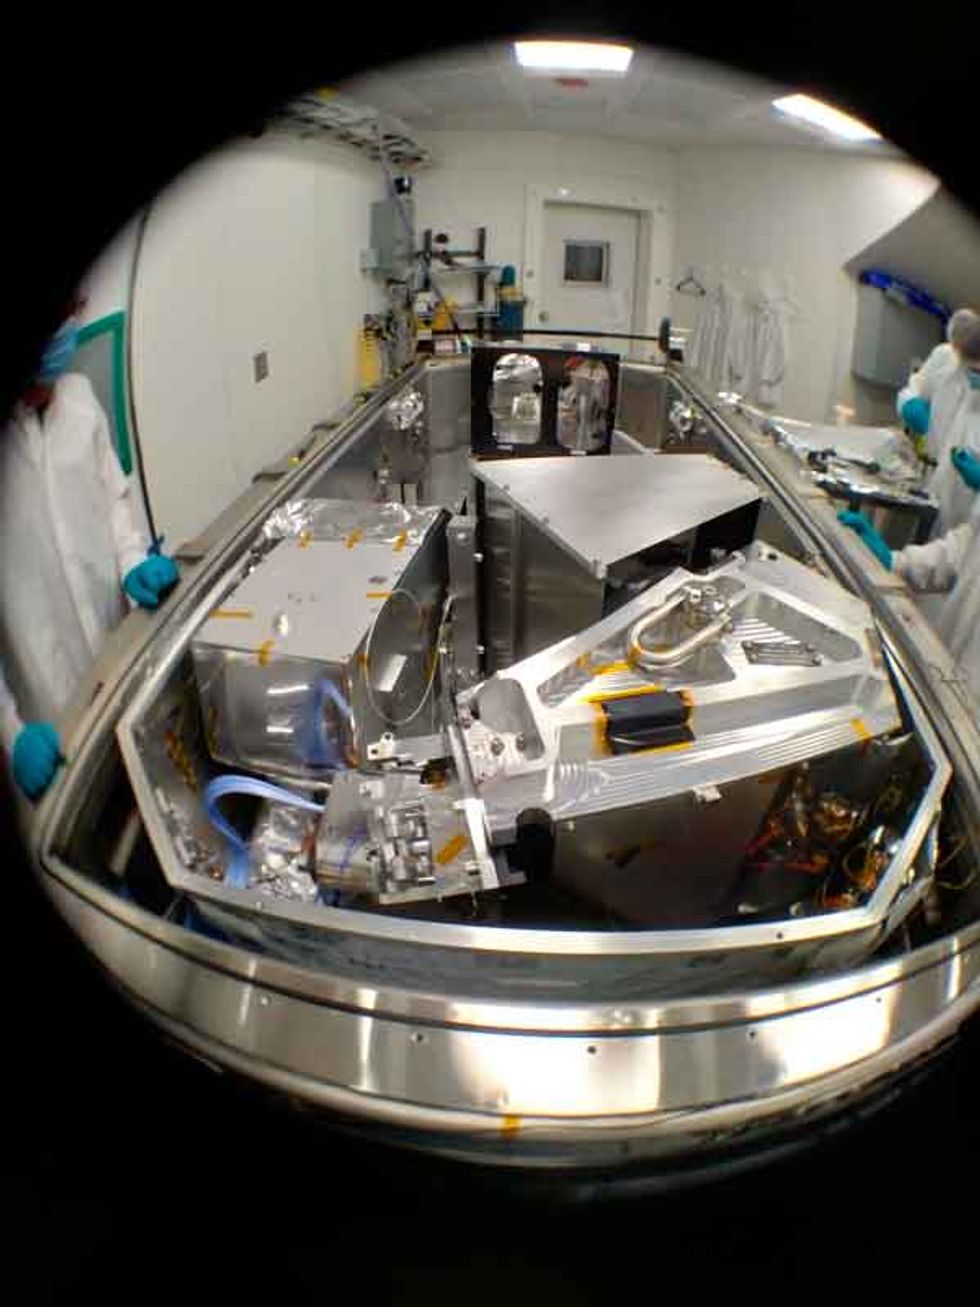 An image of the optical components of the NEID spectrograph